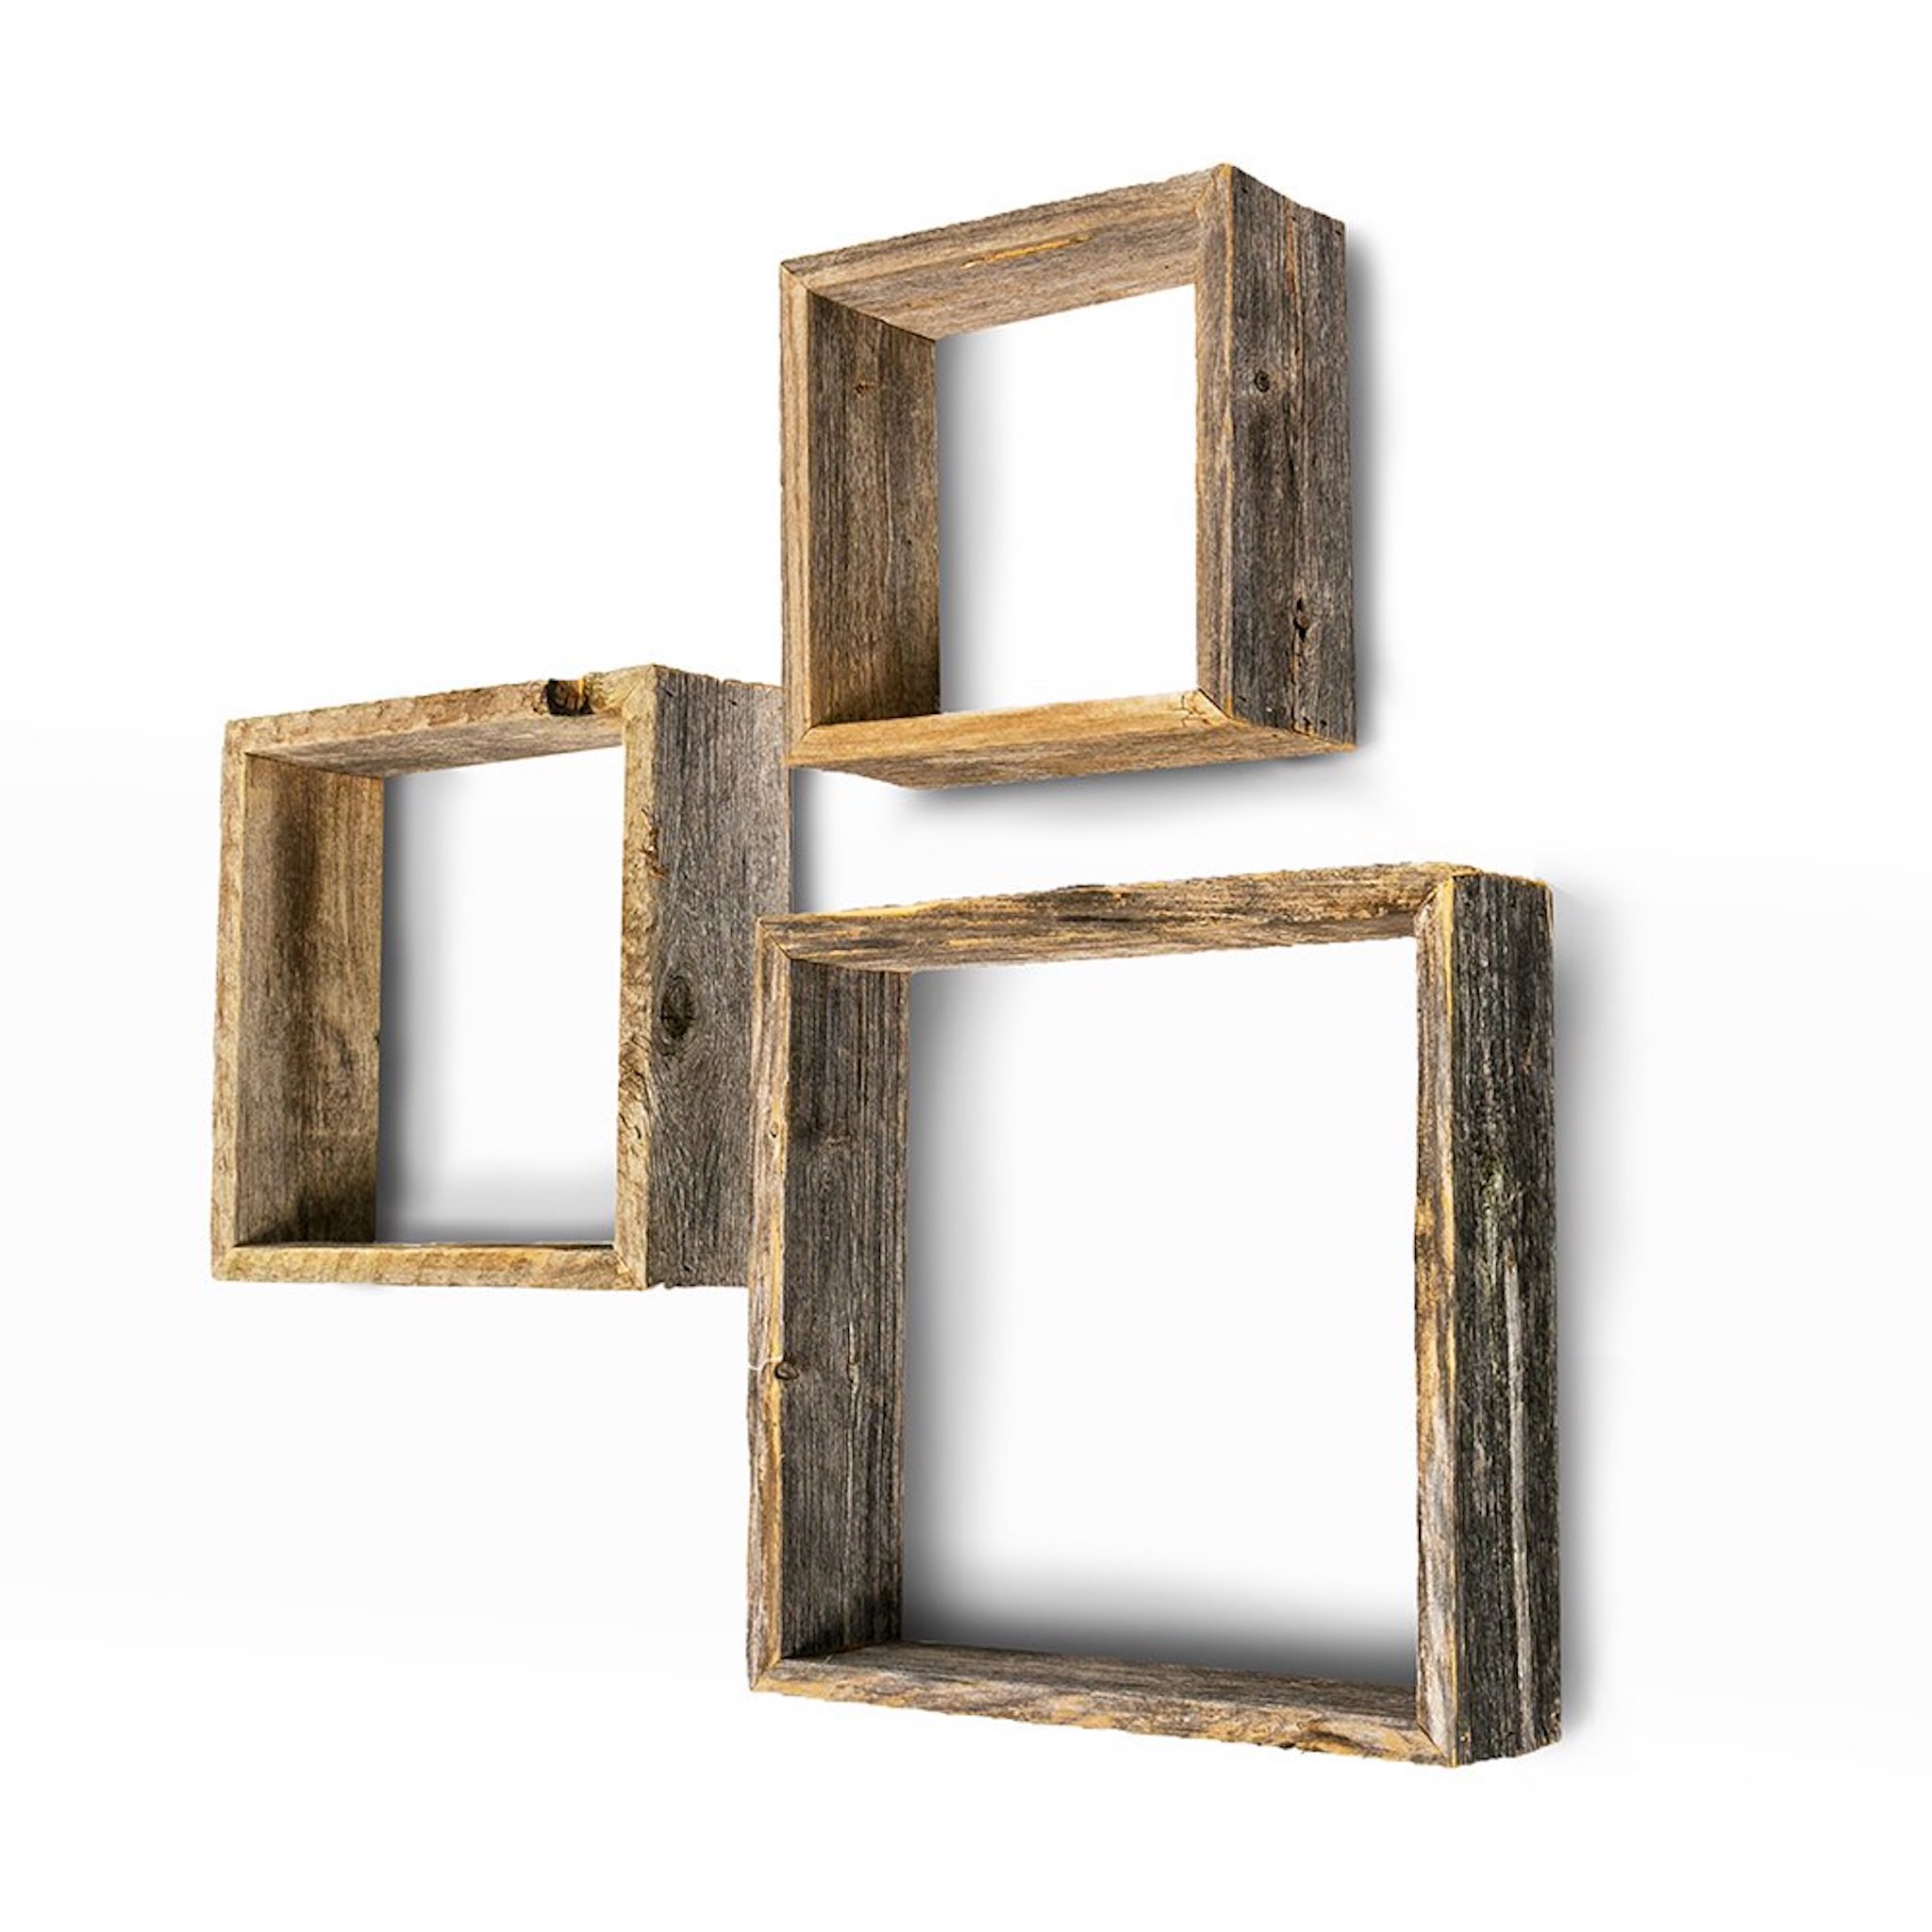 Set of 3 Square Rustic Natural Weathered Grey Wood Open Box Shelve